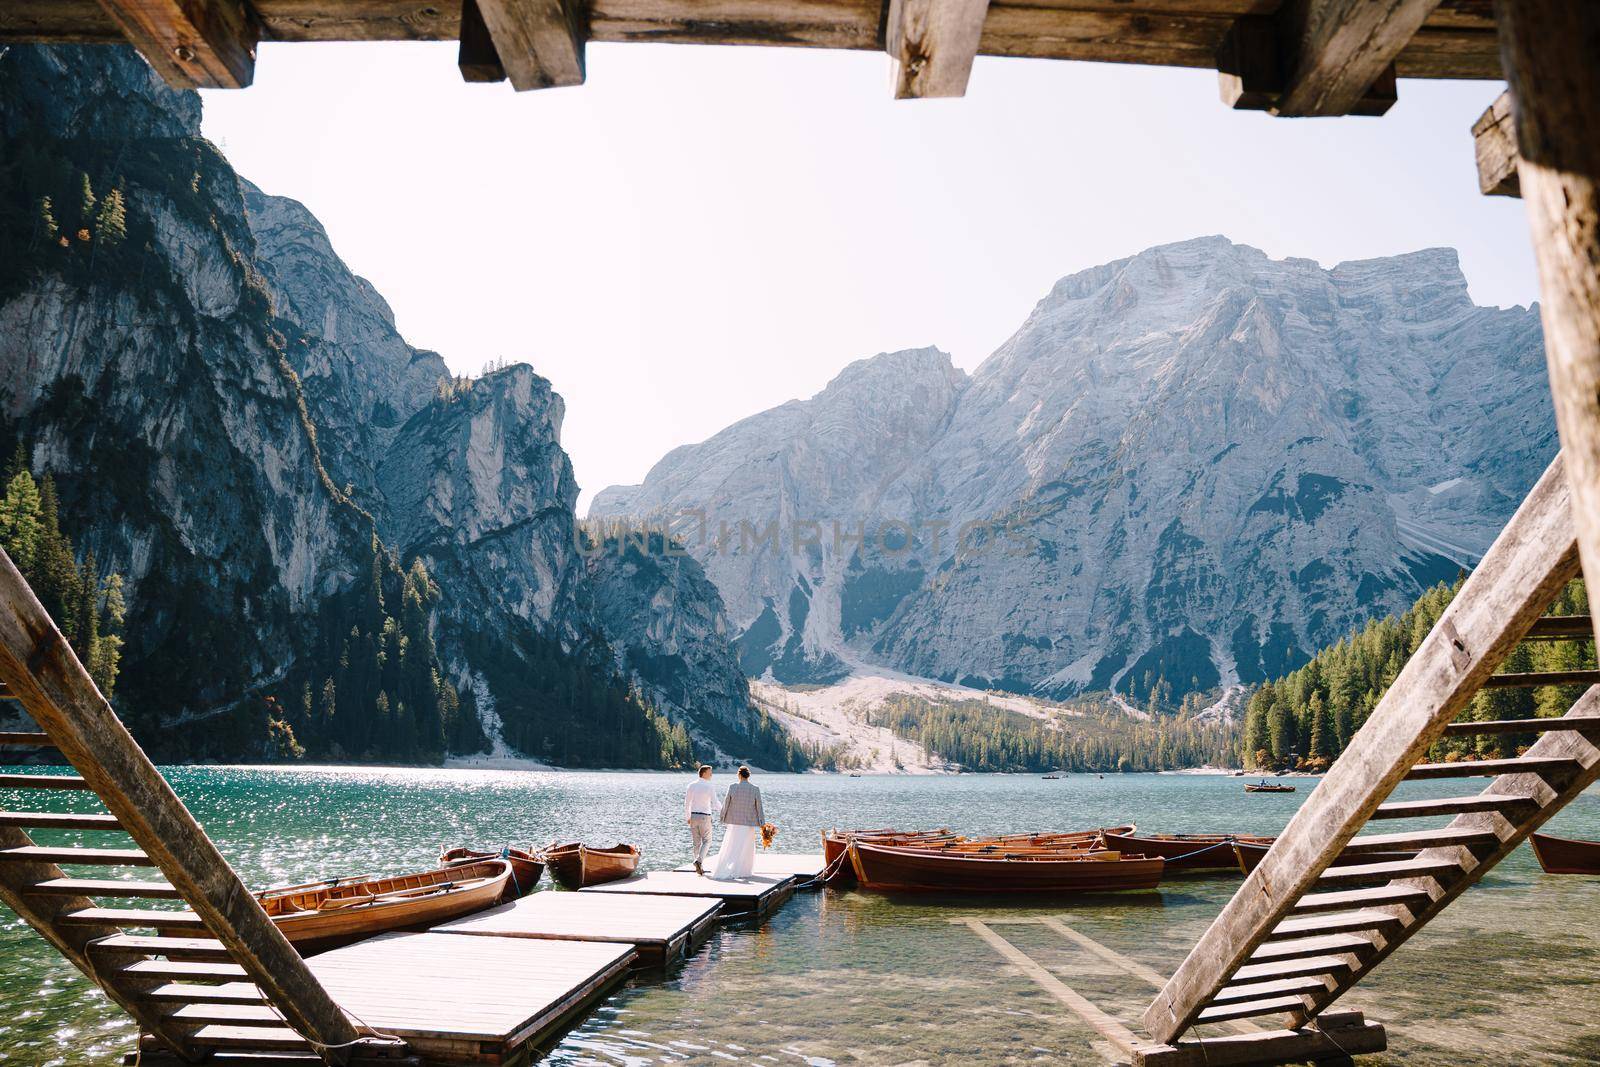 The bride and groom walk along a wooden boat dock at the Lago di Braies in Italy. Wedding in Europe, on Braies lake. Newlyweds walk, kiss, hug on a background of rocky mountains. by Nadtochiy